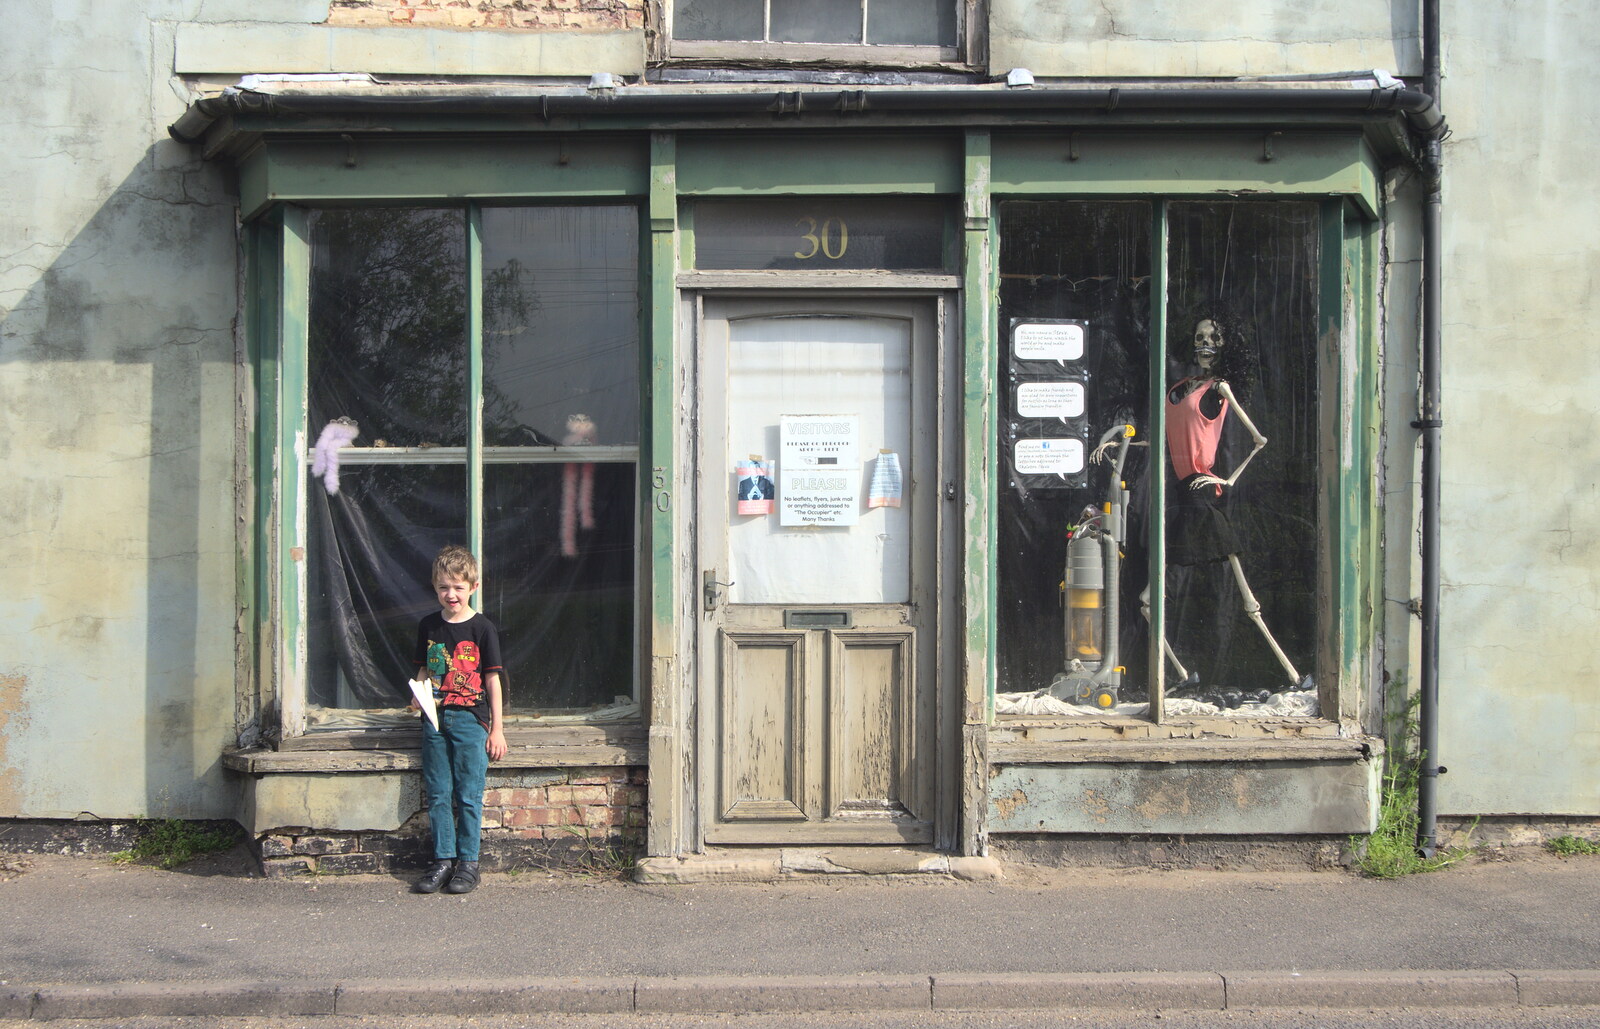 Fred by the derelict shop's window from The BSCC Cycling Weekender, Outwell, West Norfolk - 7th May 2016